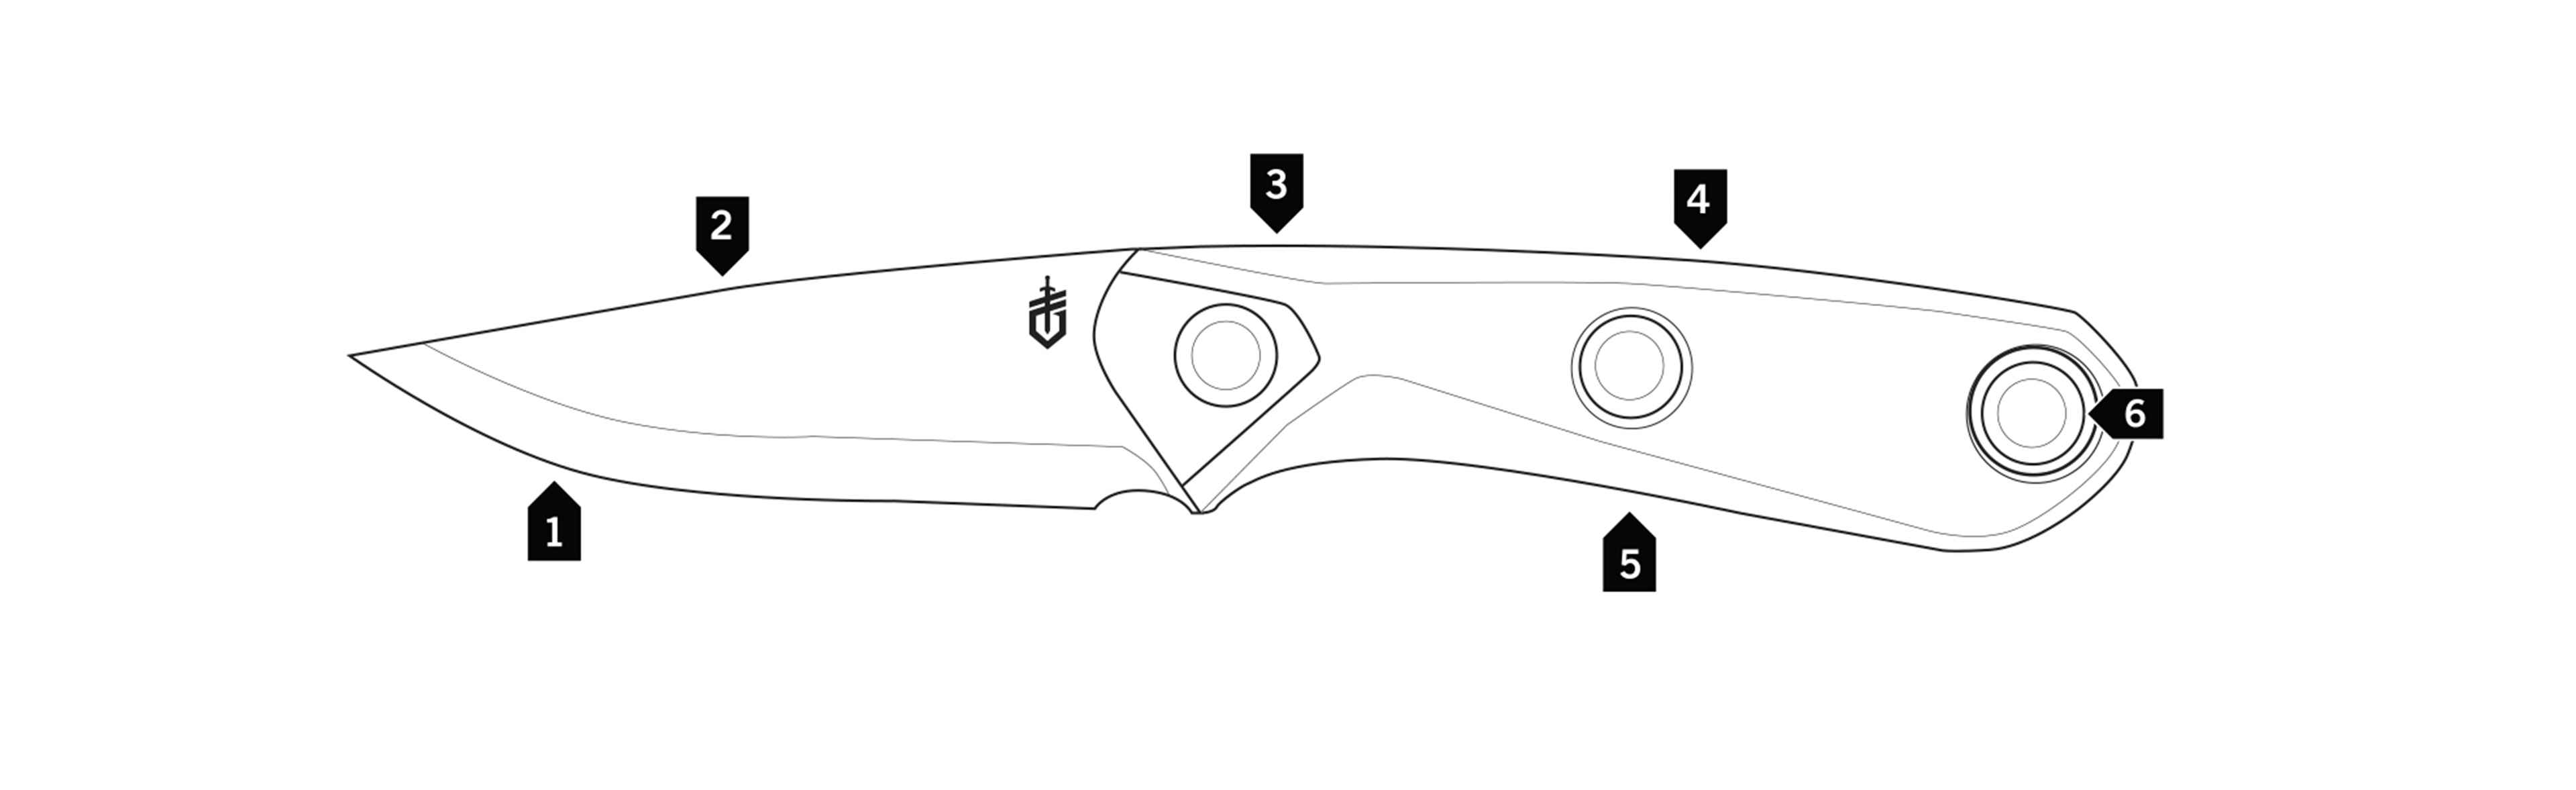 Principle™ Bushcraft Fixed blade knife by gerber